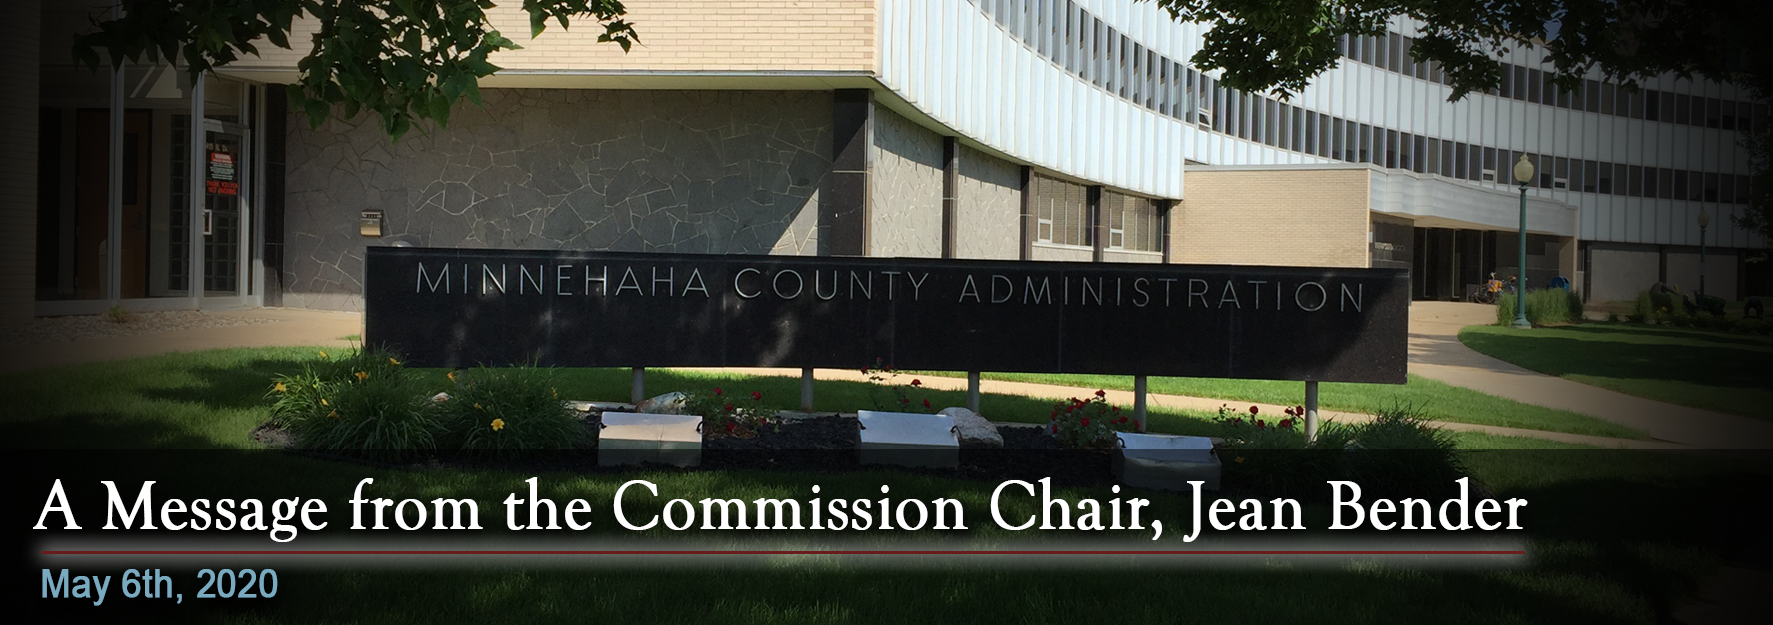 A Message From the Commission Chair, Jean Bender